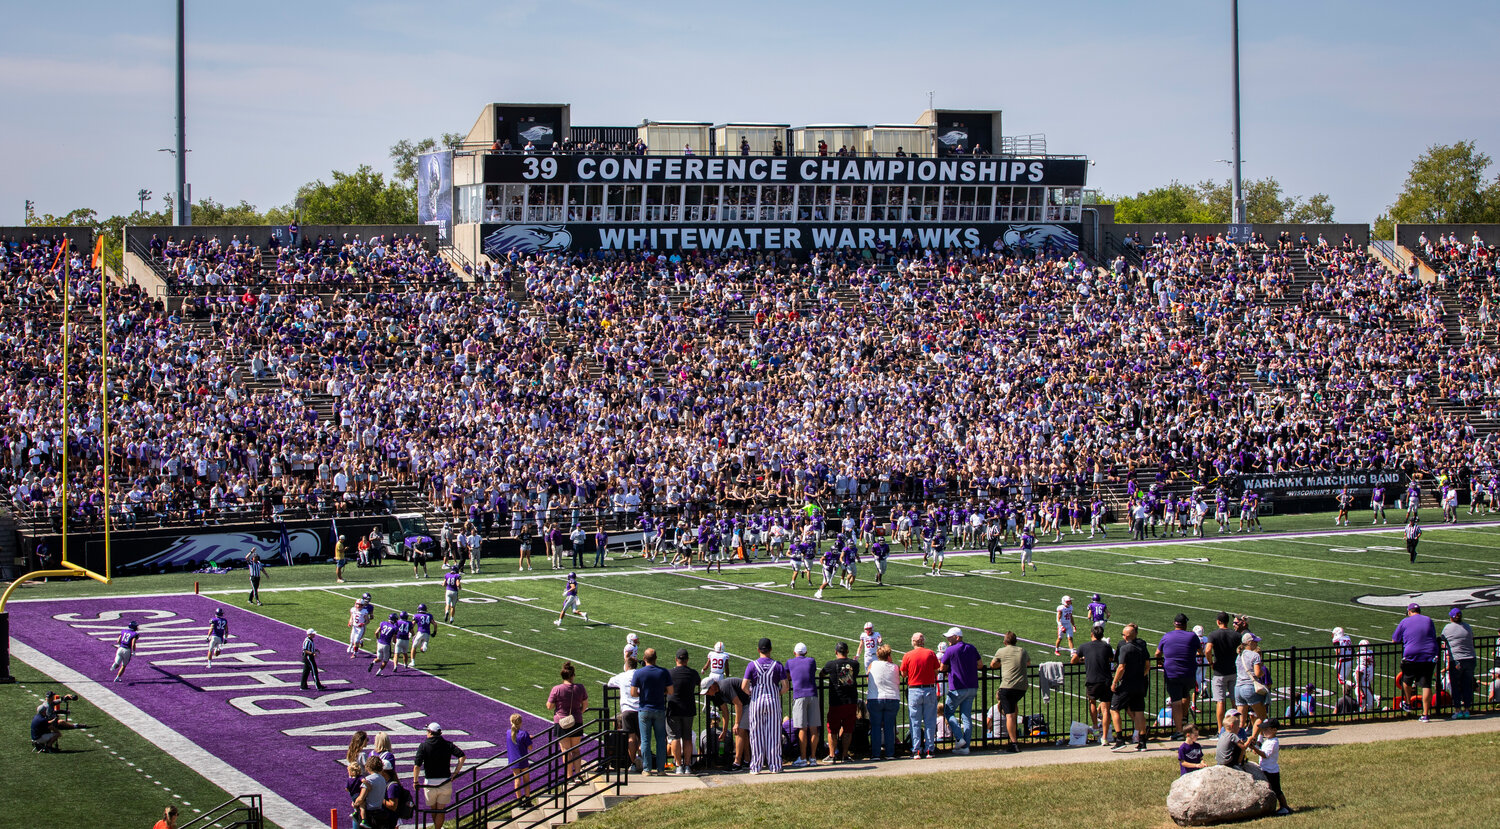 The UW-Whitewater Warhawks defeated St. John's University 56-28 in the first home game of the season at Perkins Stadium on Sept. 9, 2023.